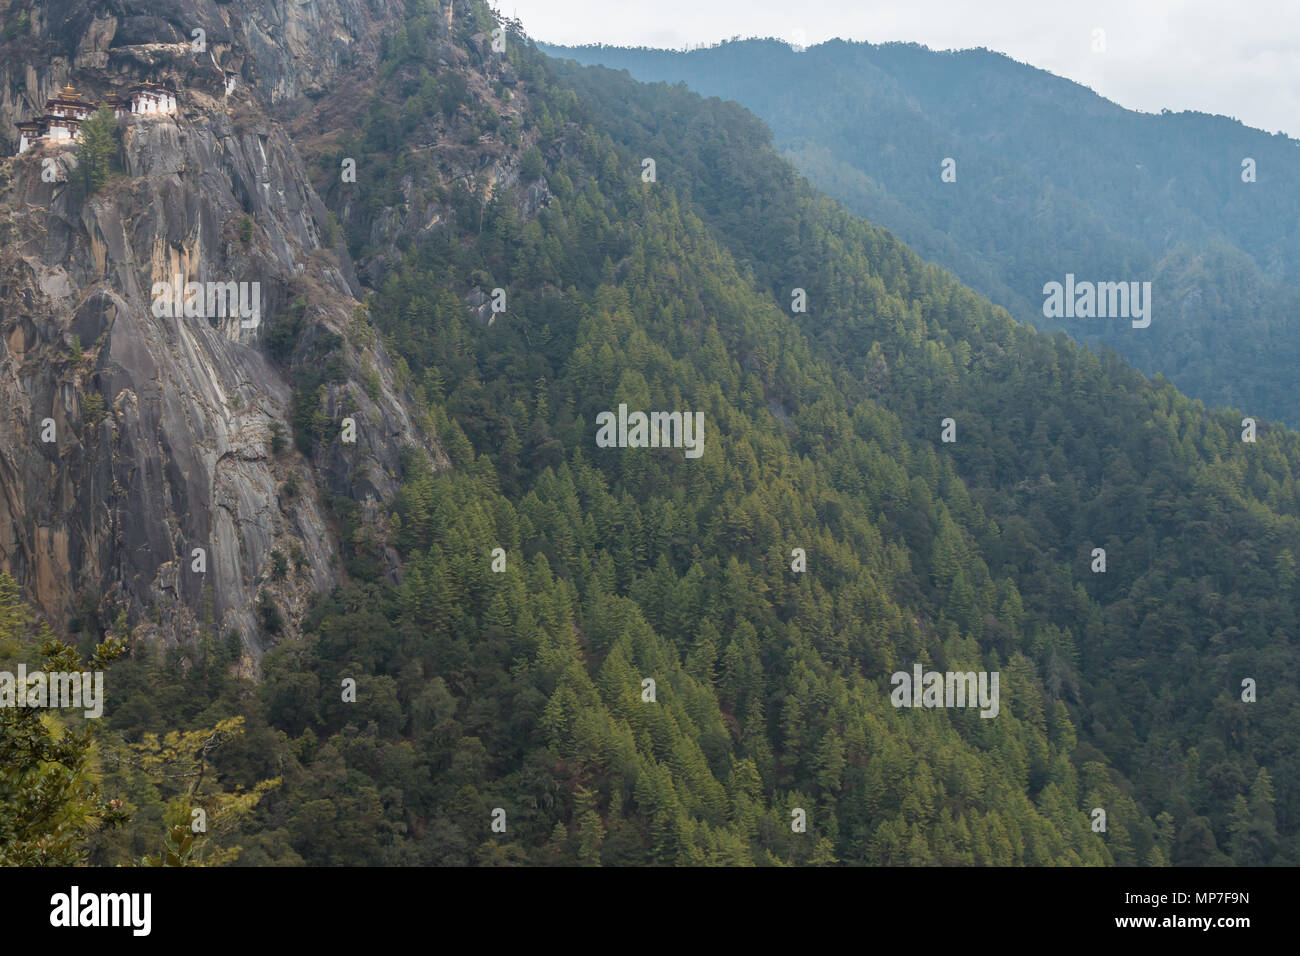 Tiger's Nest (Paro Taktsang), a Buddhist monastery perched at the top of a cliff near Paro, Bhutan. Stock Photo